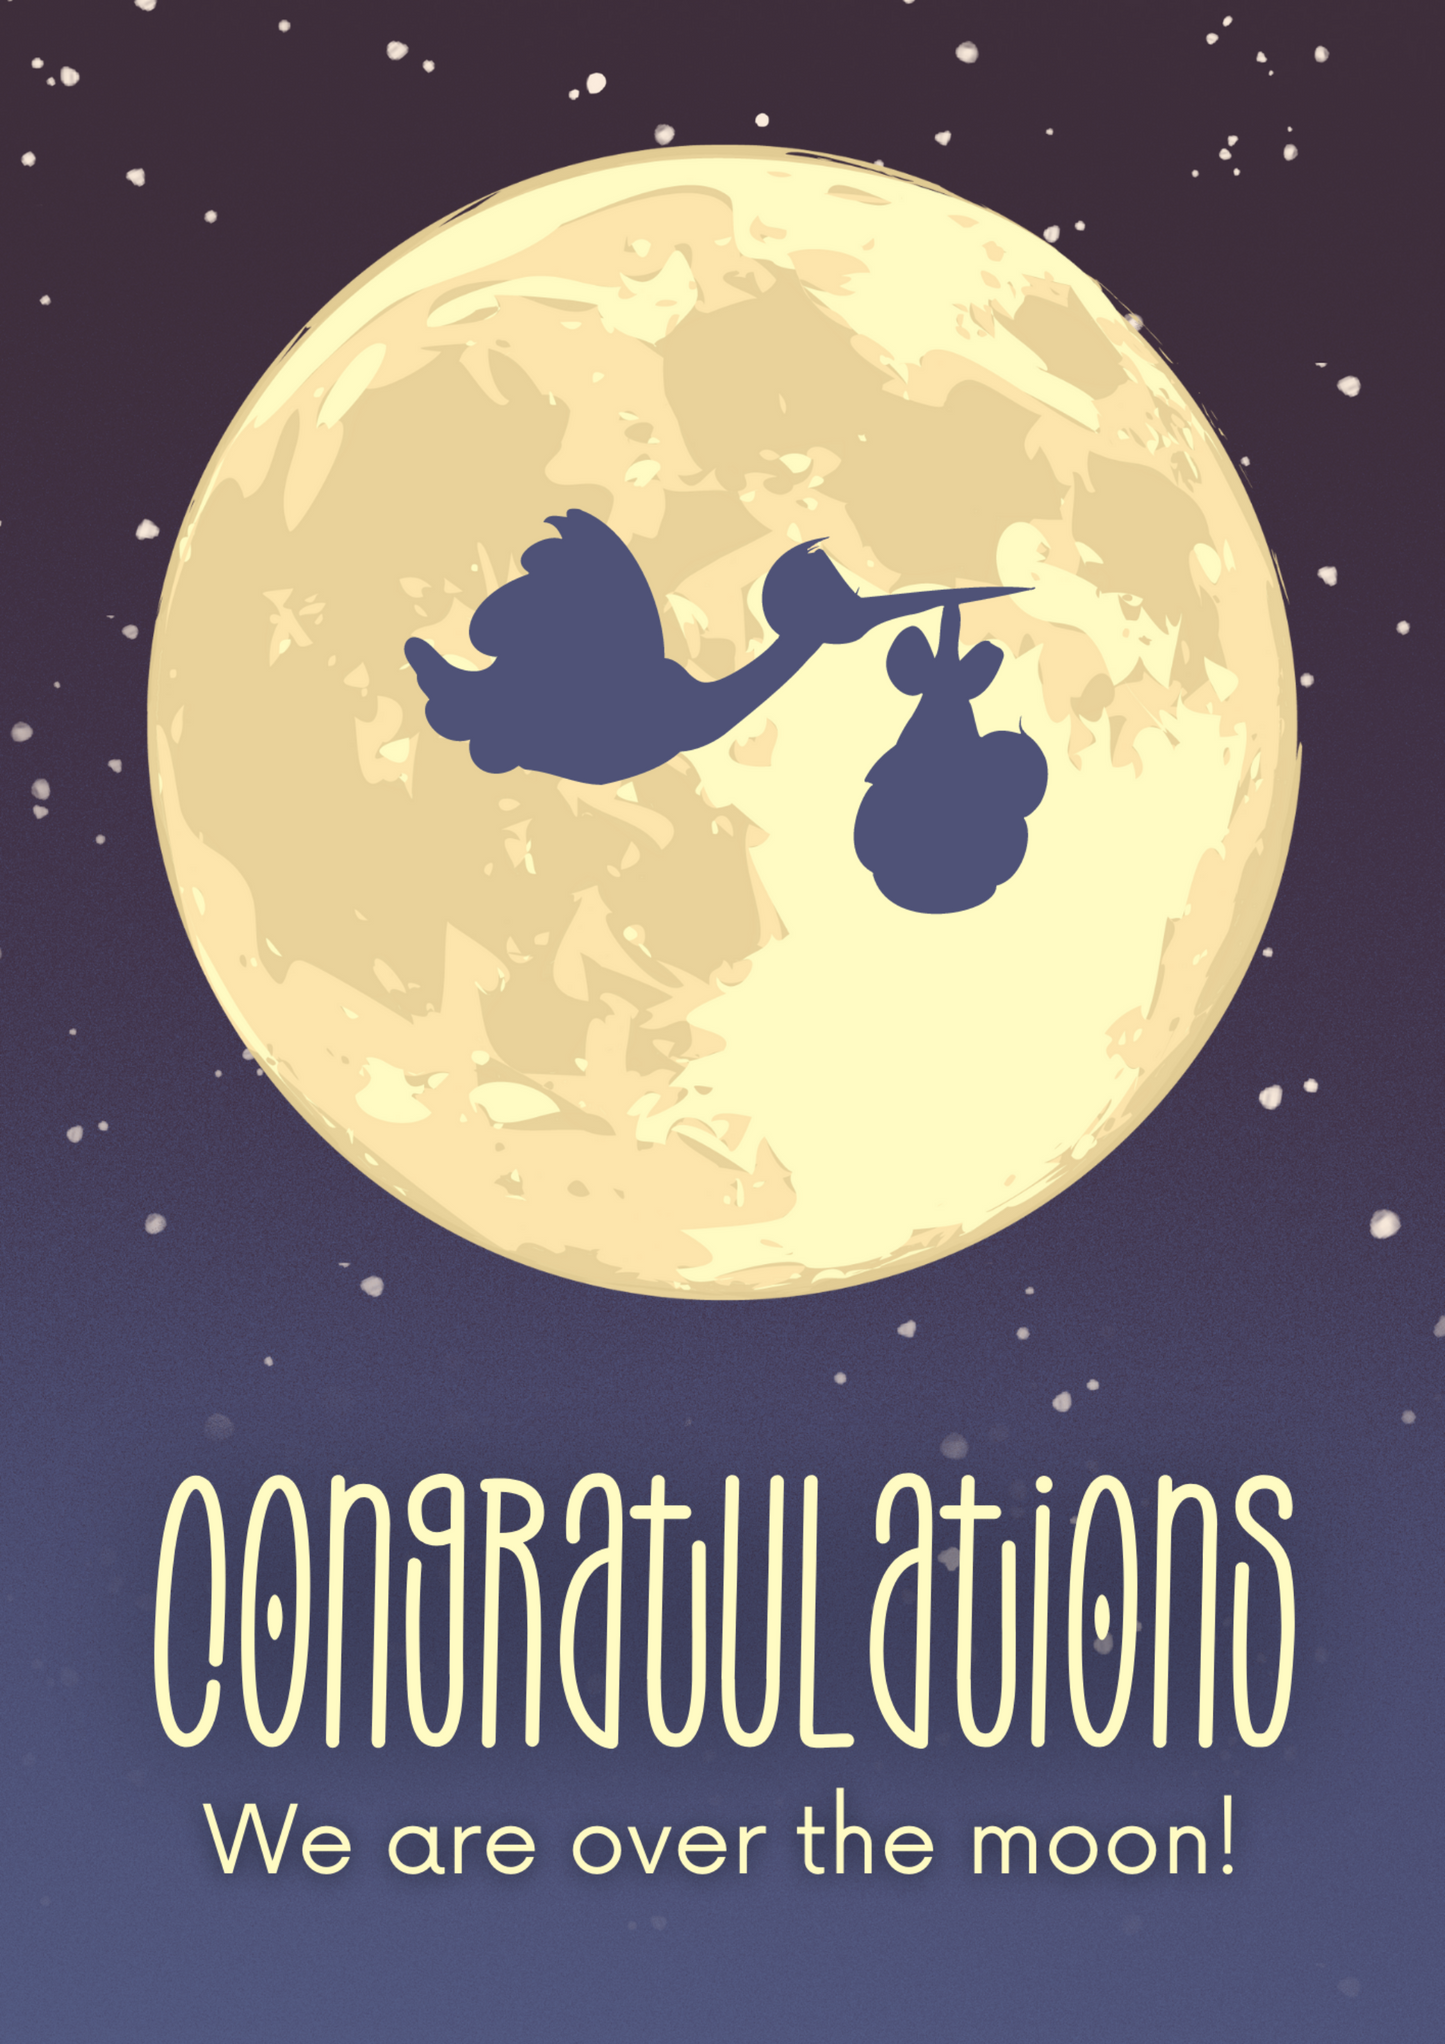 We Are Over The Moon New Baby Card - Congratulations New Baby Card - New Baby Greeting Card.